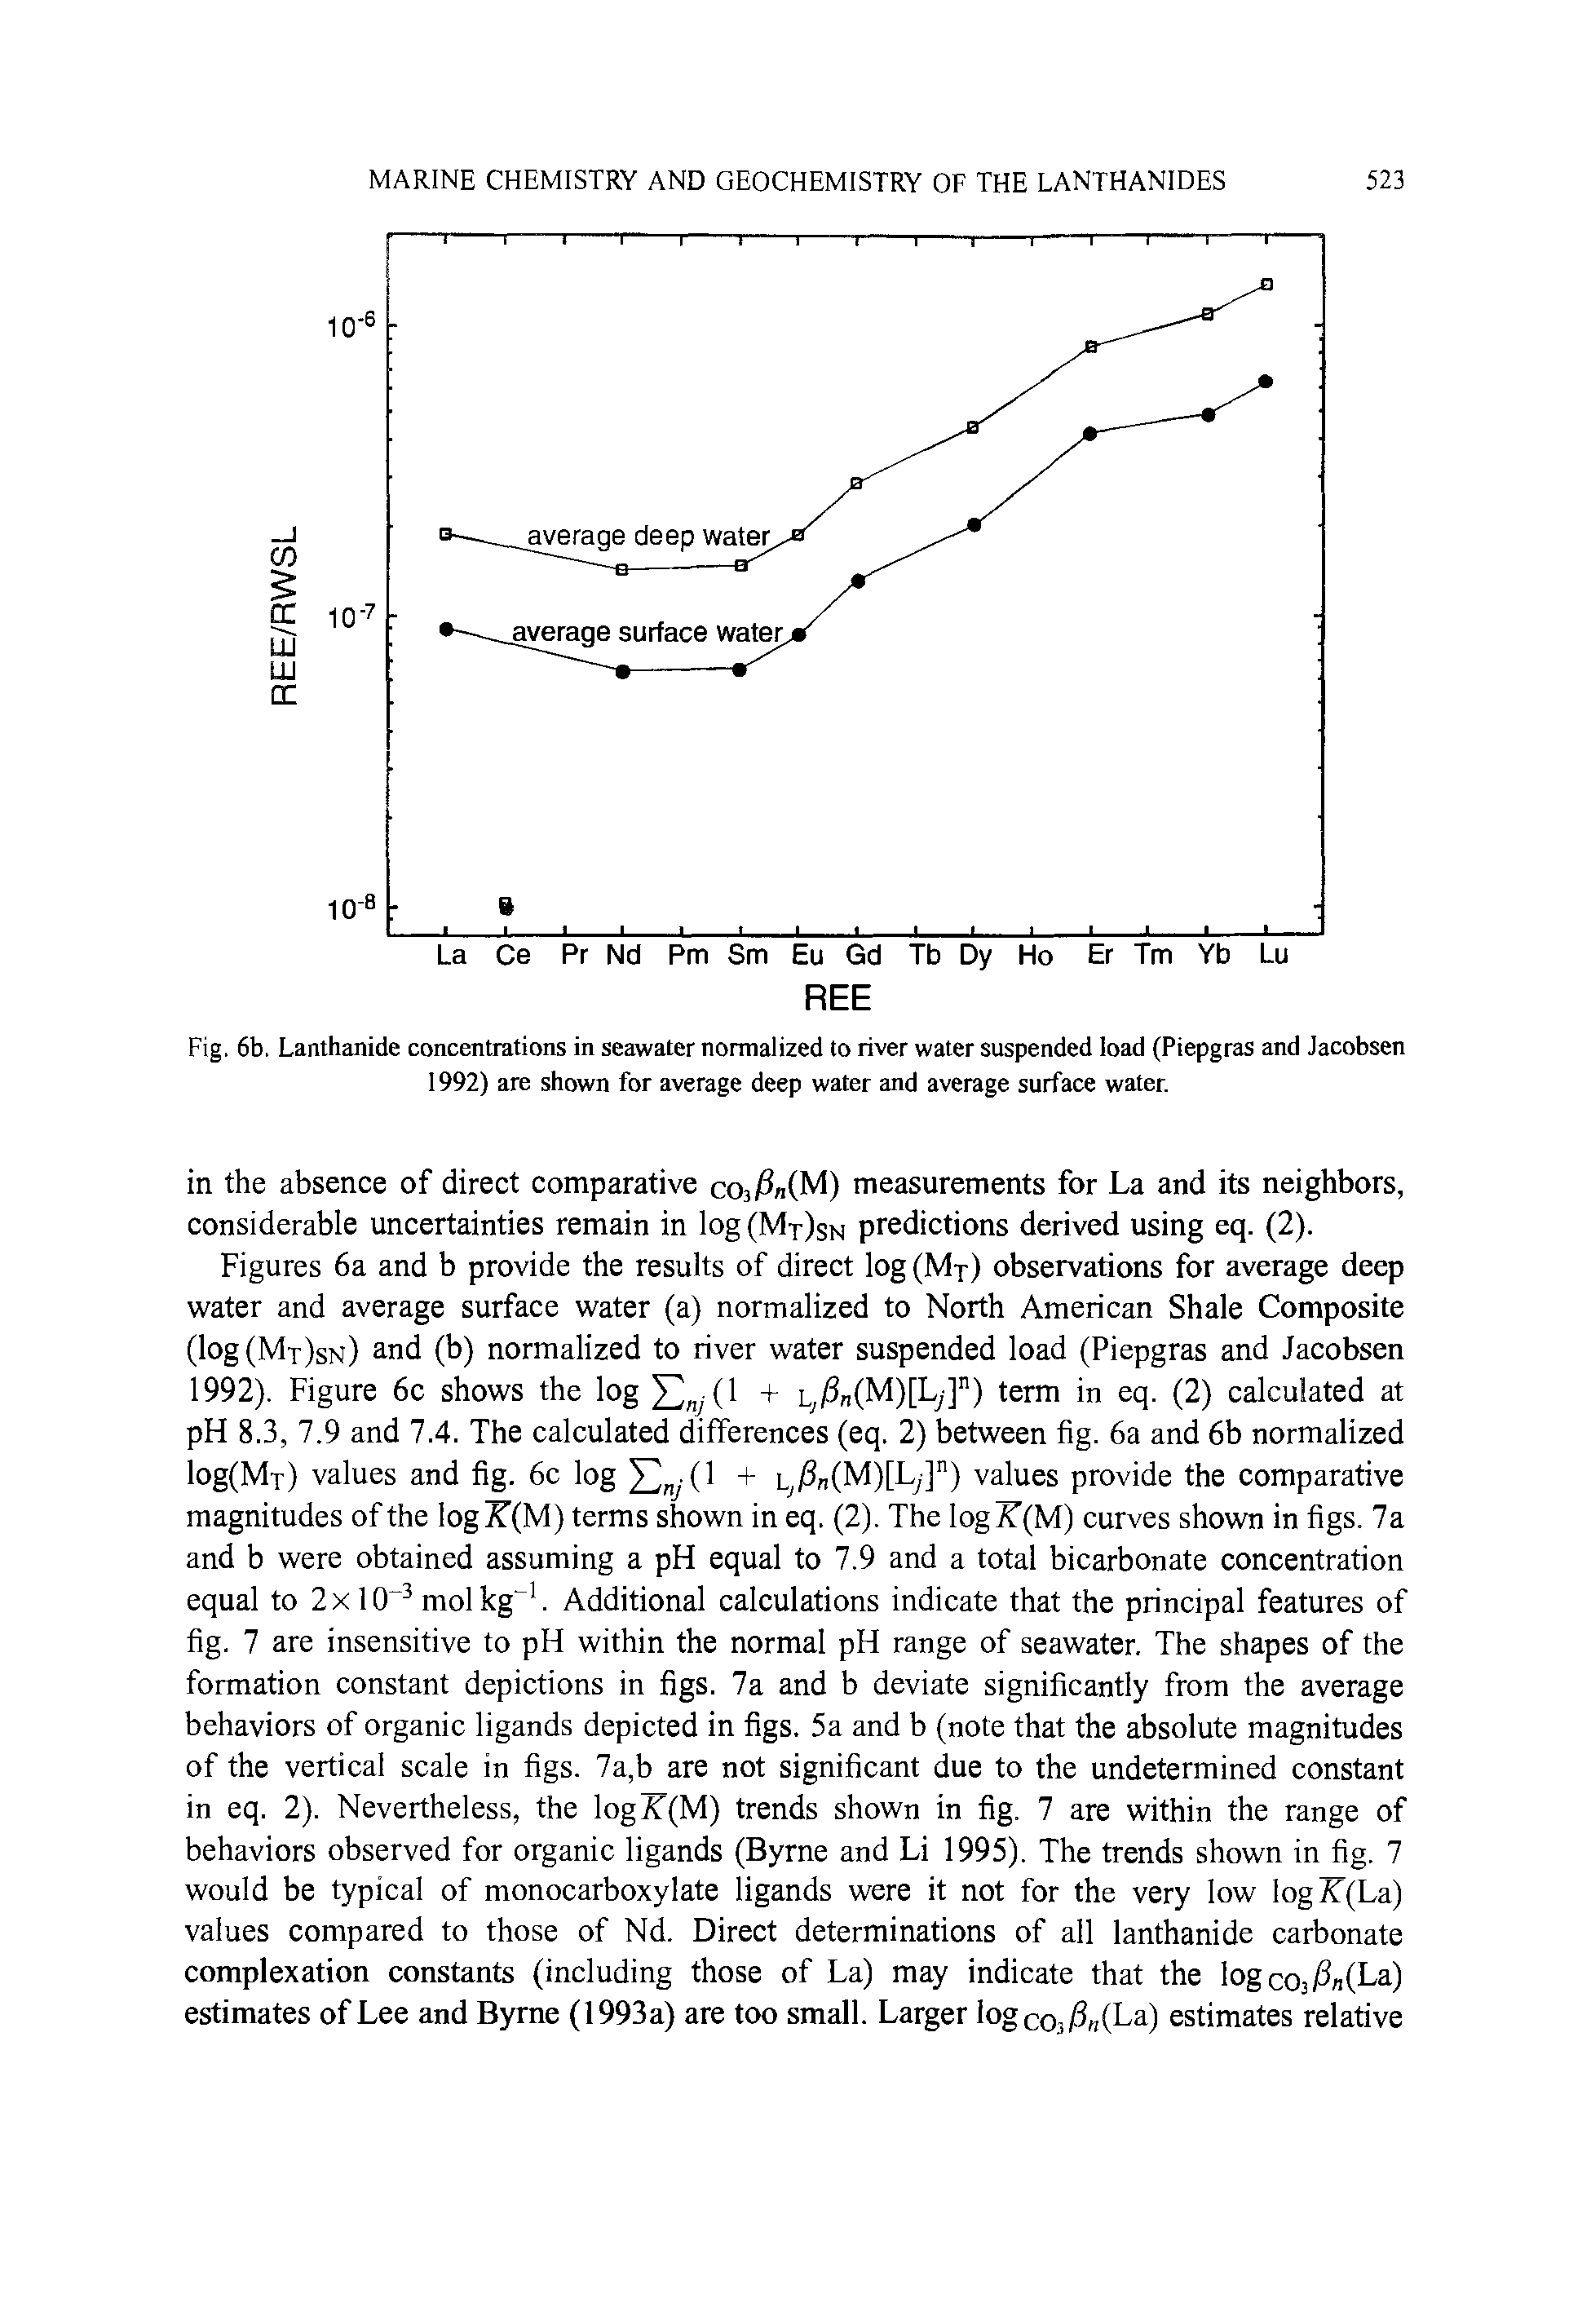 Figures 6a and b provide the results of direct log (Mr) observations for average deep water and average surface water (a) normalized to North American Shale Composite (log(MT)sN) and (b) normalized to river water suspended load (Piepgras and Jacobsen 1992). Figure 6c shows the log + L /8n(M)[L ]") term in eq. (2) calculated at...